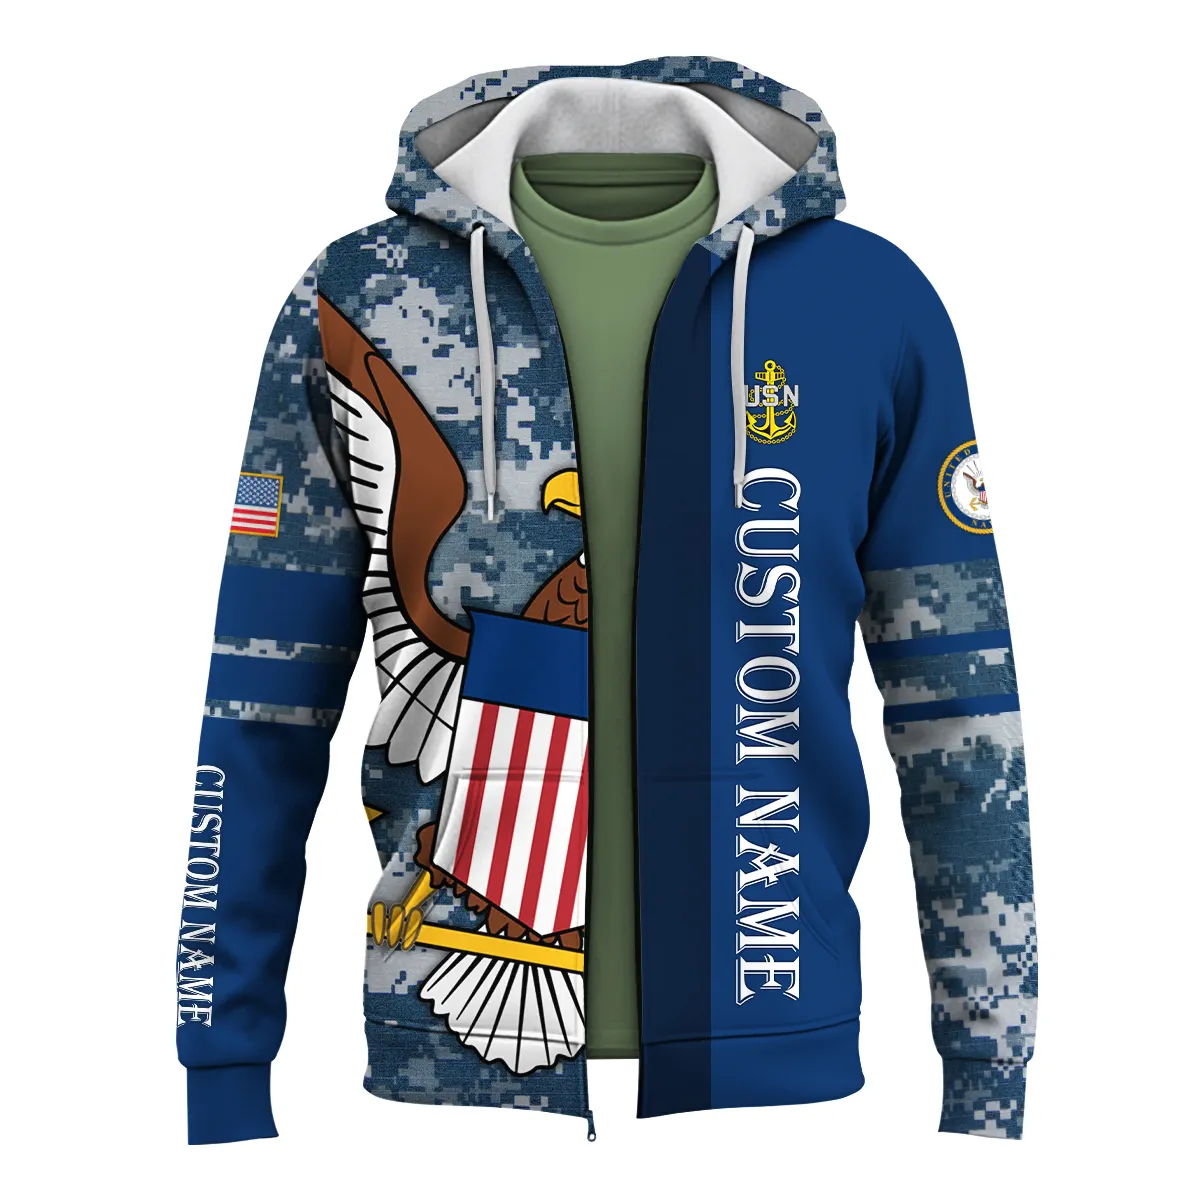 Personalized Gift Being A Veteran Never Ends Camo Pattern U.S. Coast Guard Apparel All Over Prints BLVTR210624A02CG